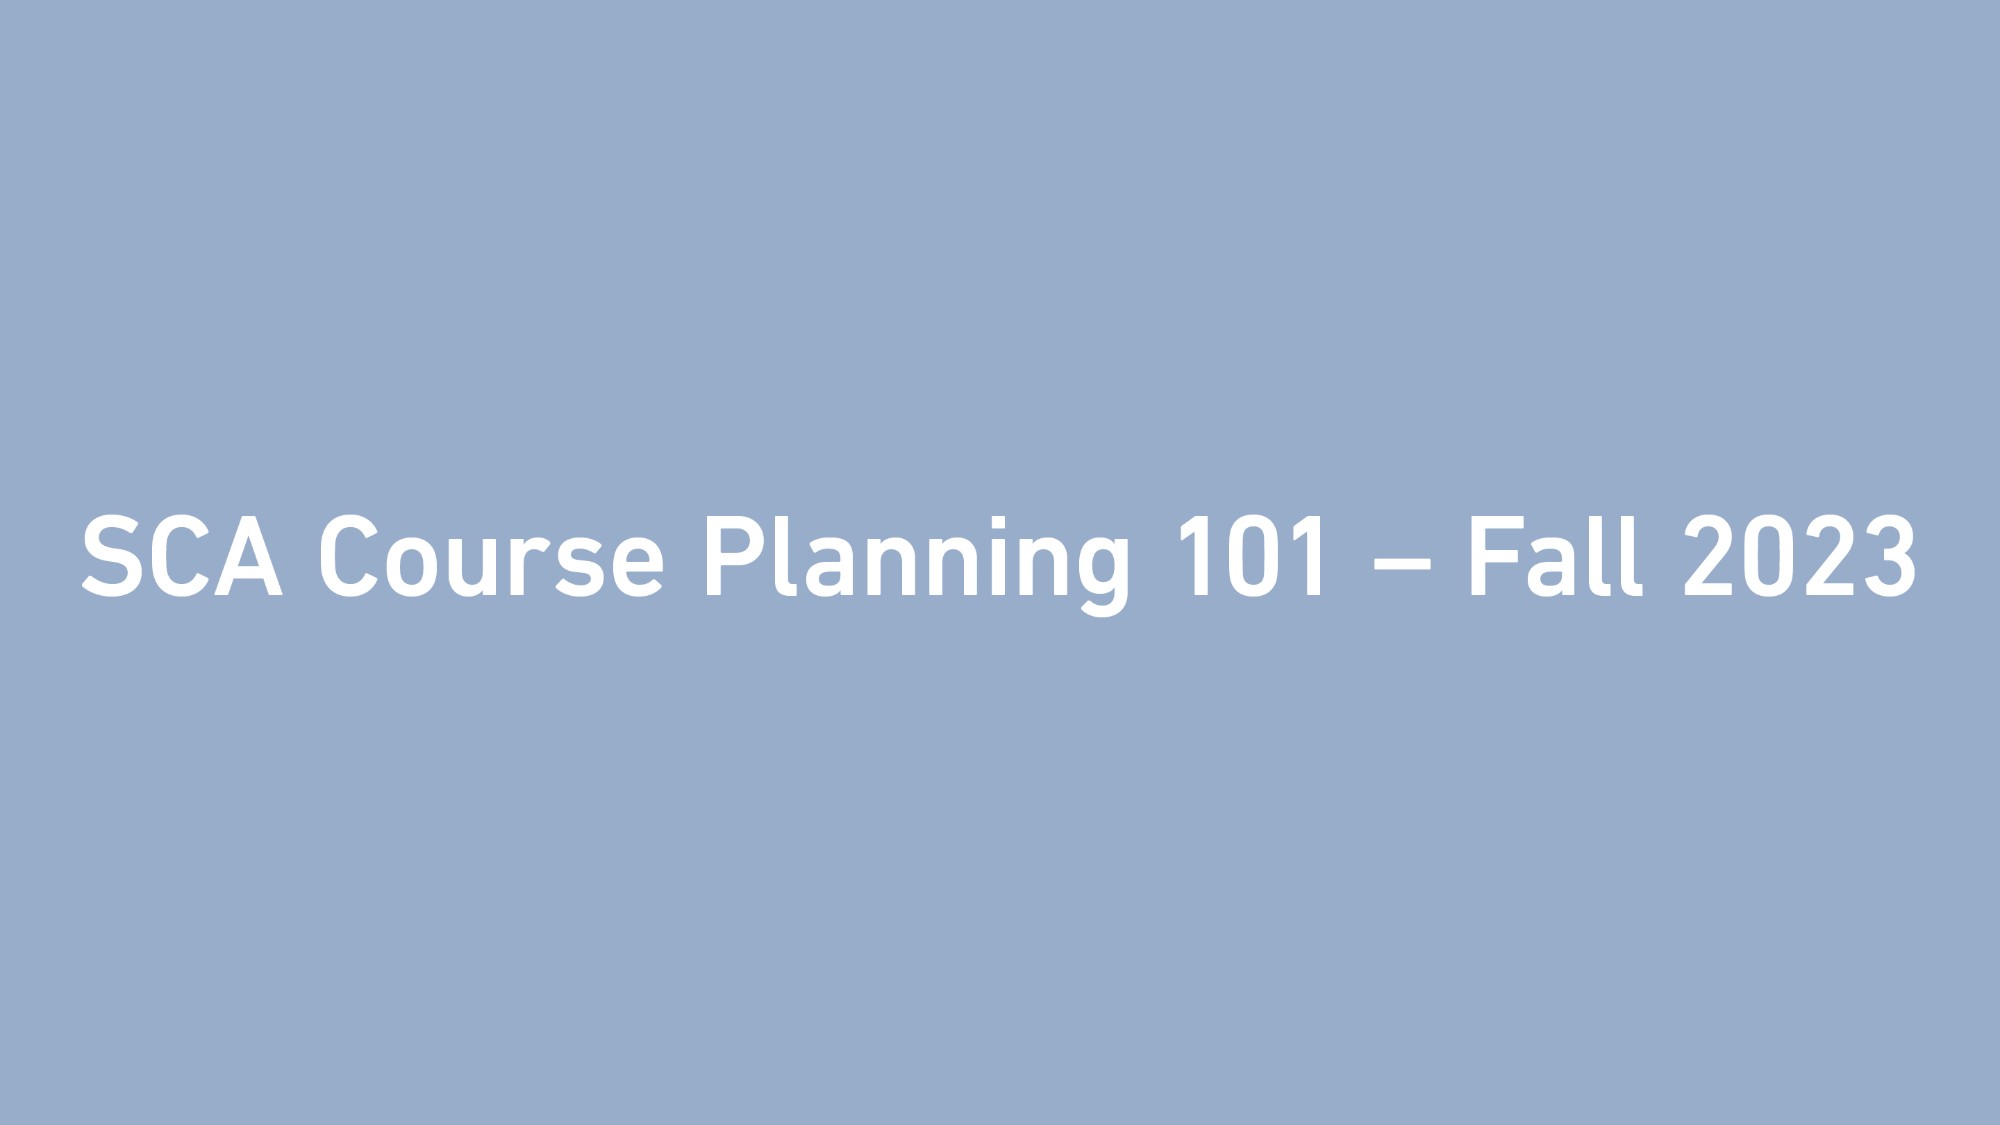 SCA Course Planning 101 – Fall 2023